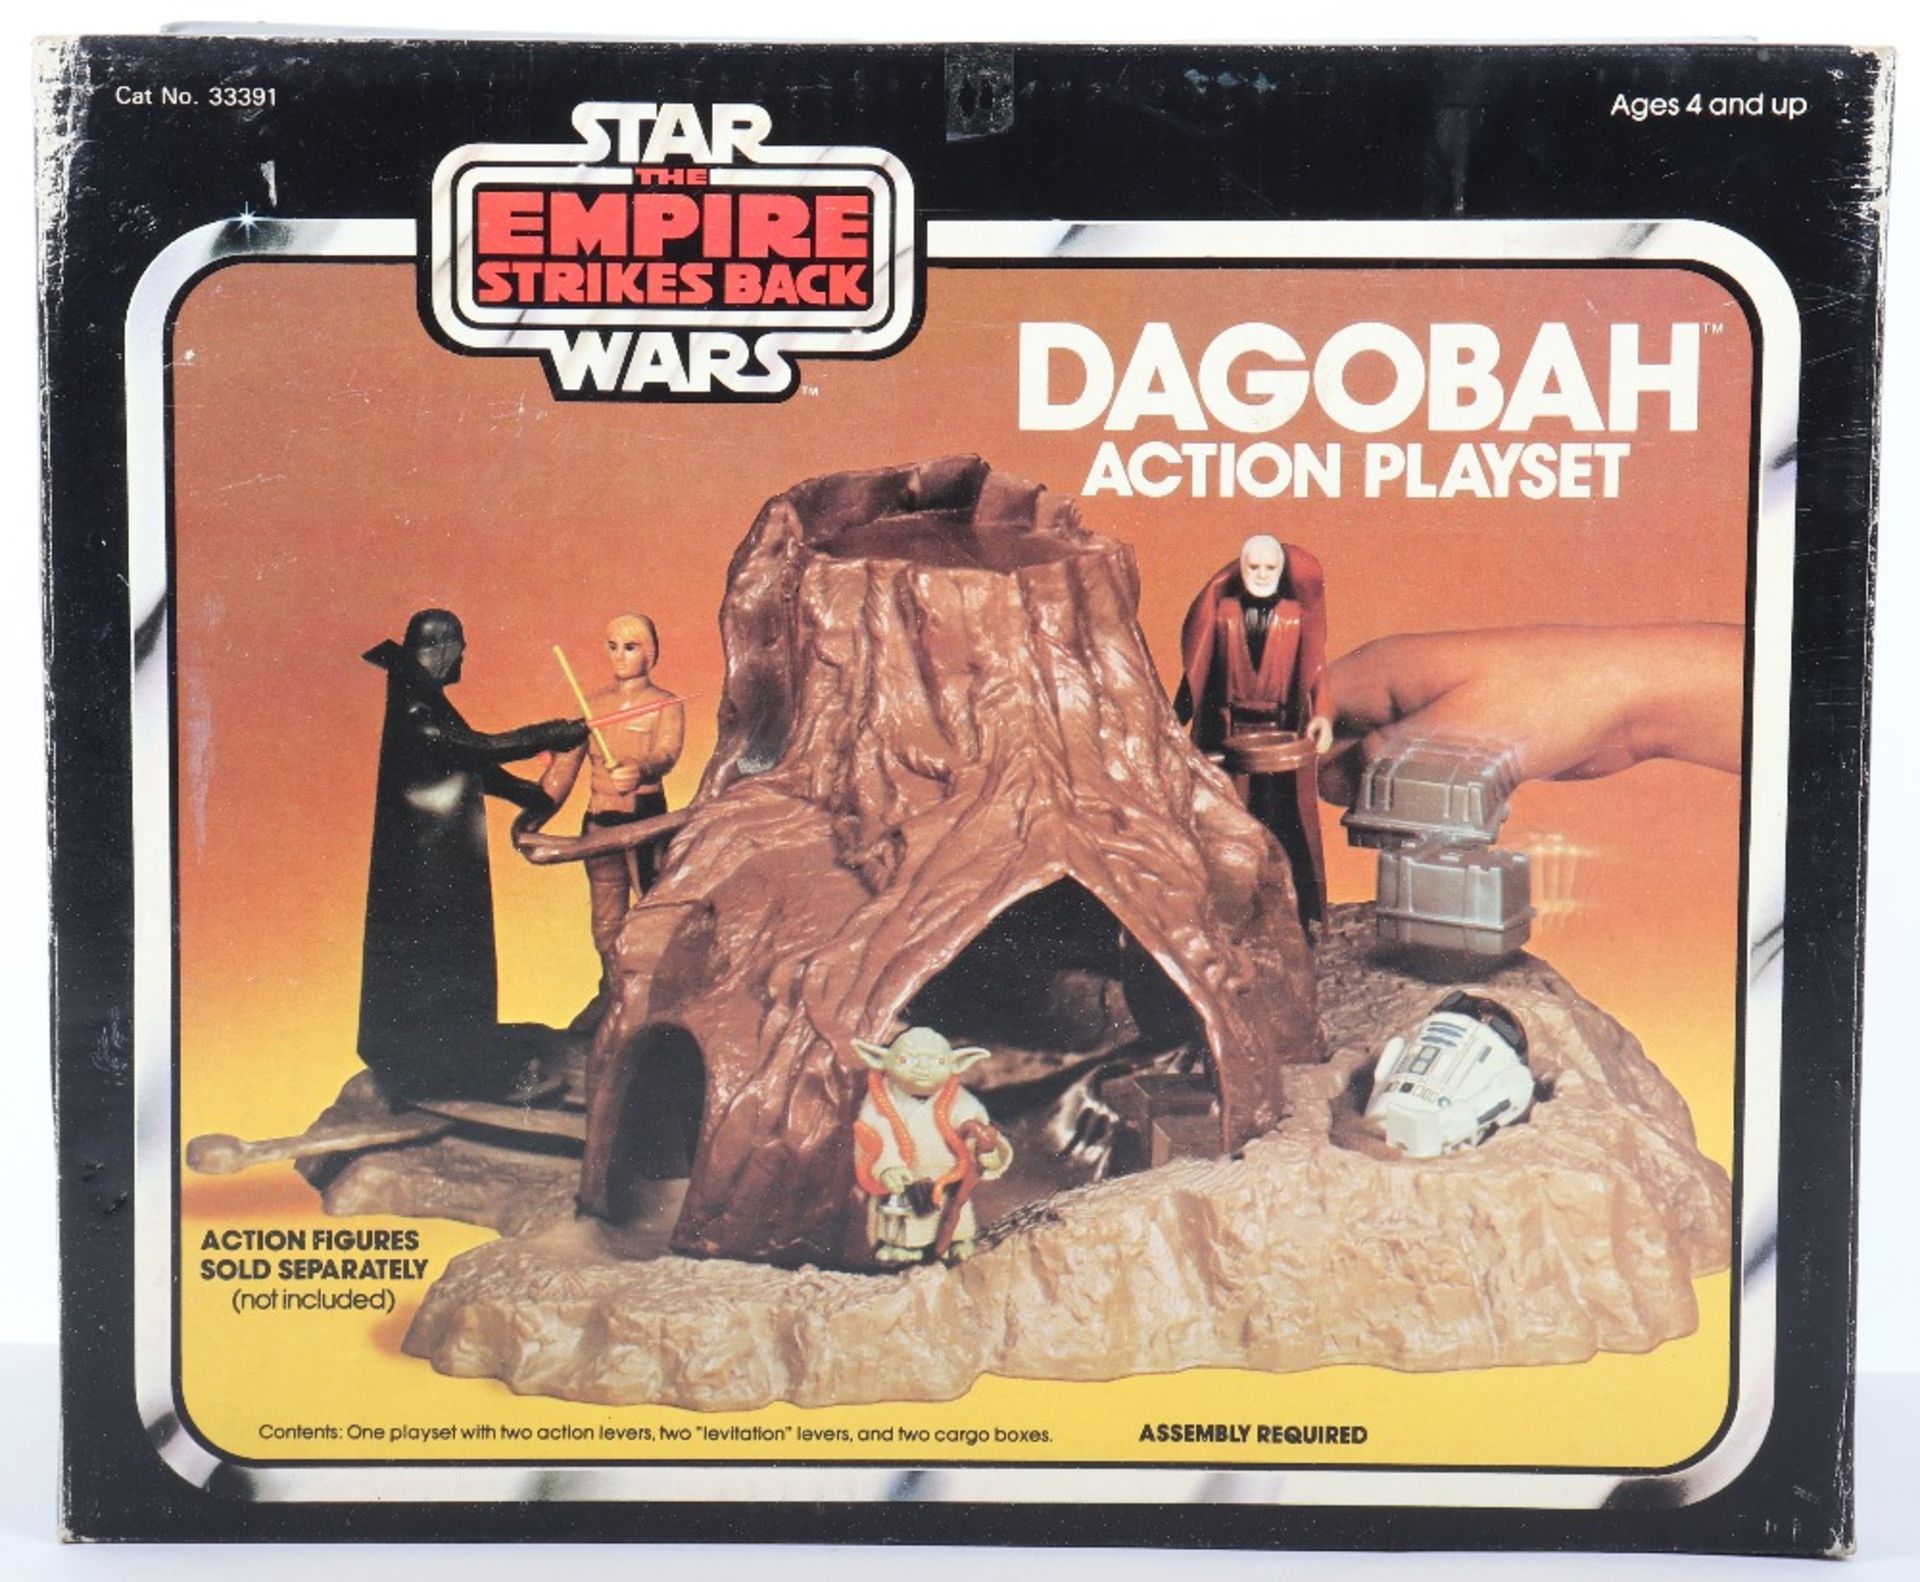 Boxed Palitoy Star Wars The Empire Strikes Back Dagobah Action Playset - Image 8 of 13